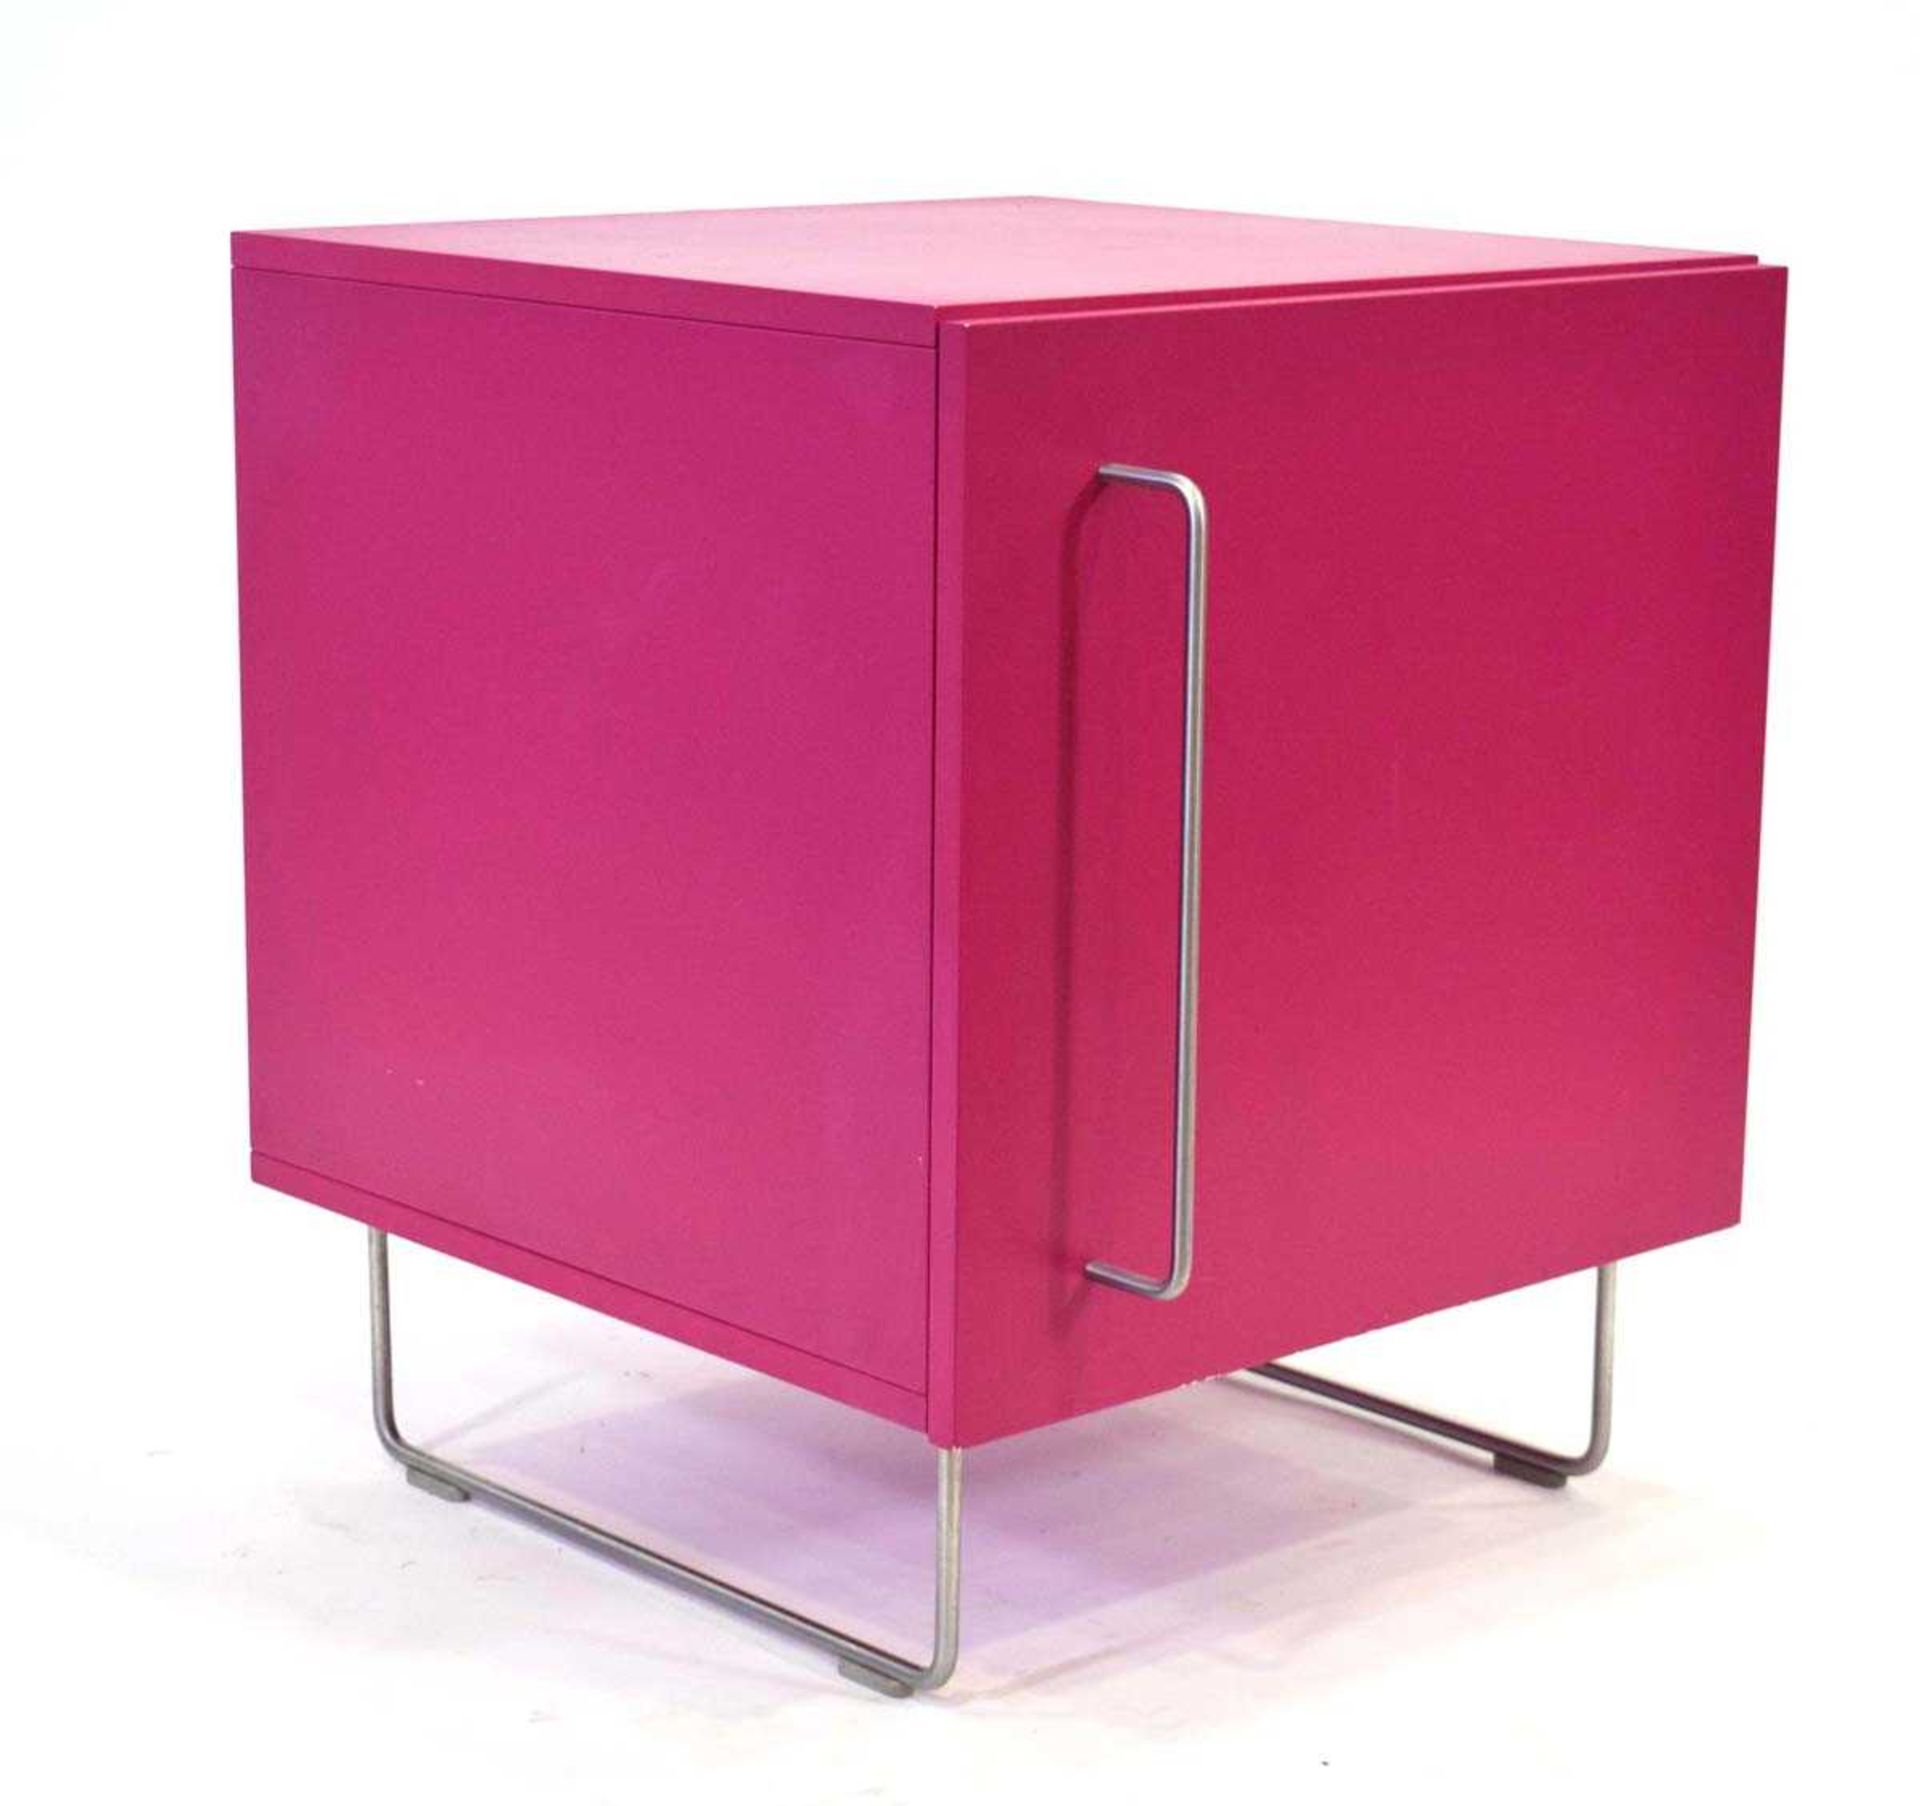 Jasper Morrison for Cappellini, a 'Plan' Range pink lacquered single-door cabinet with stainless